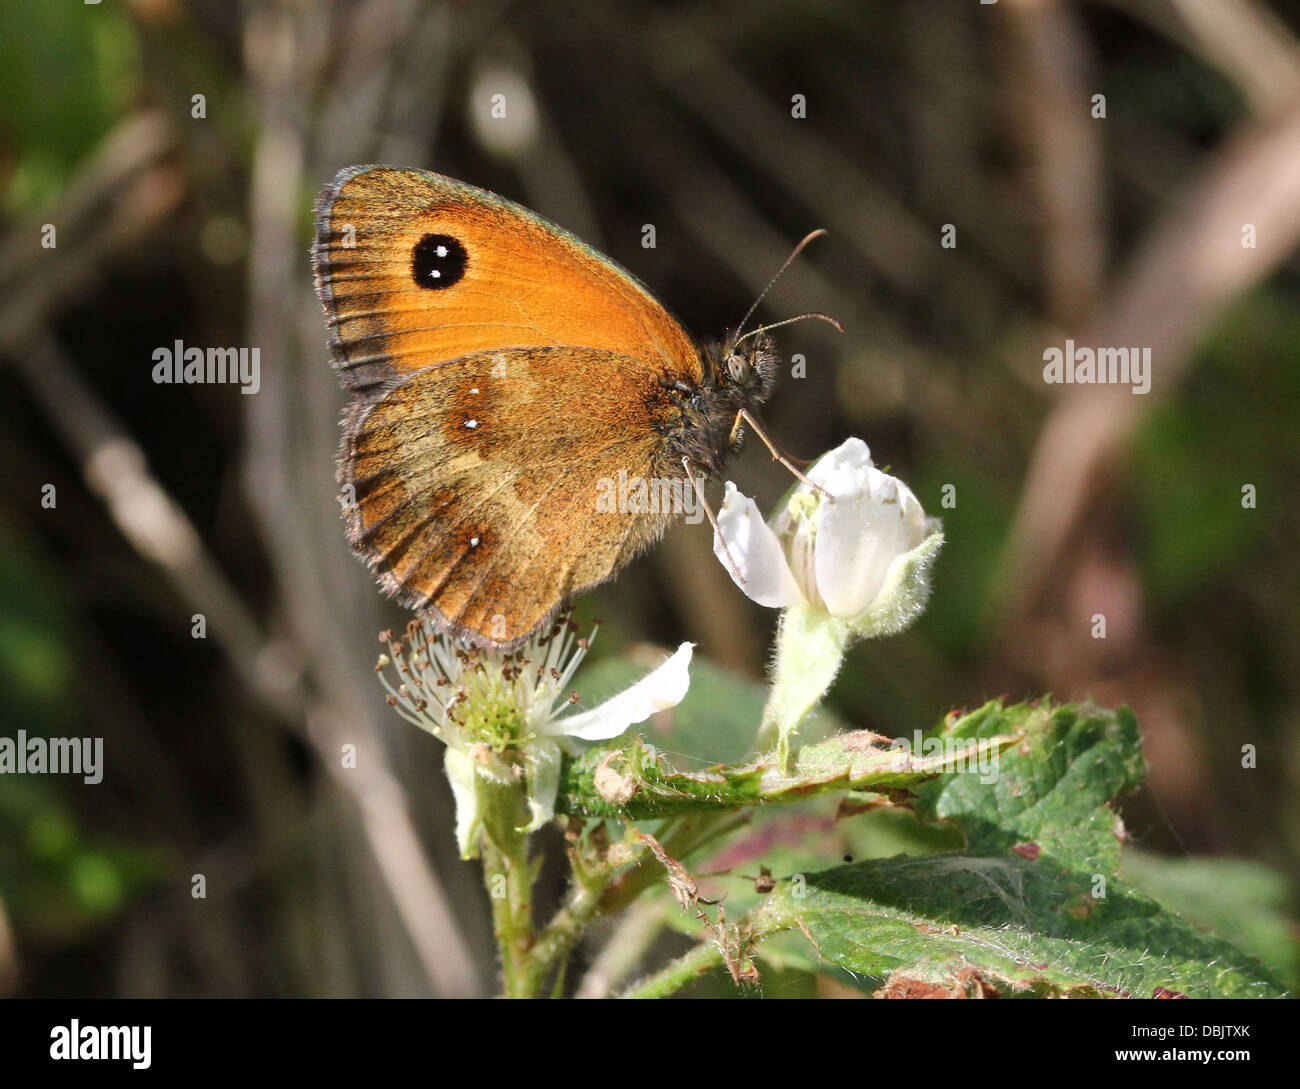 Gatekeeper or Hedge Brown butterfly (Pyronia tithonus) foraging on blackberry flower (11 images in this series, 50 in all) Stock Photo